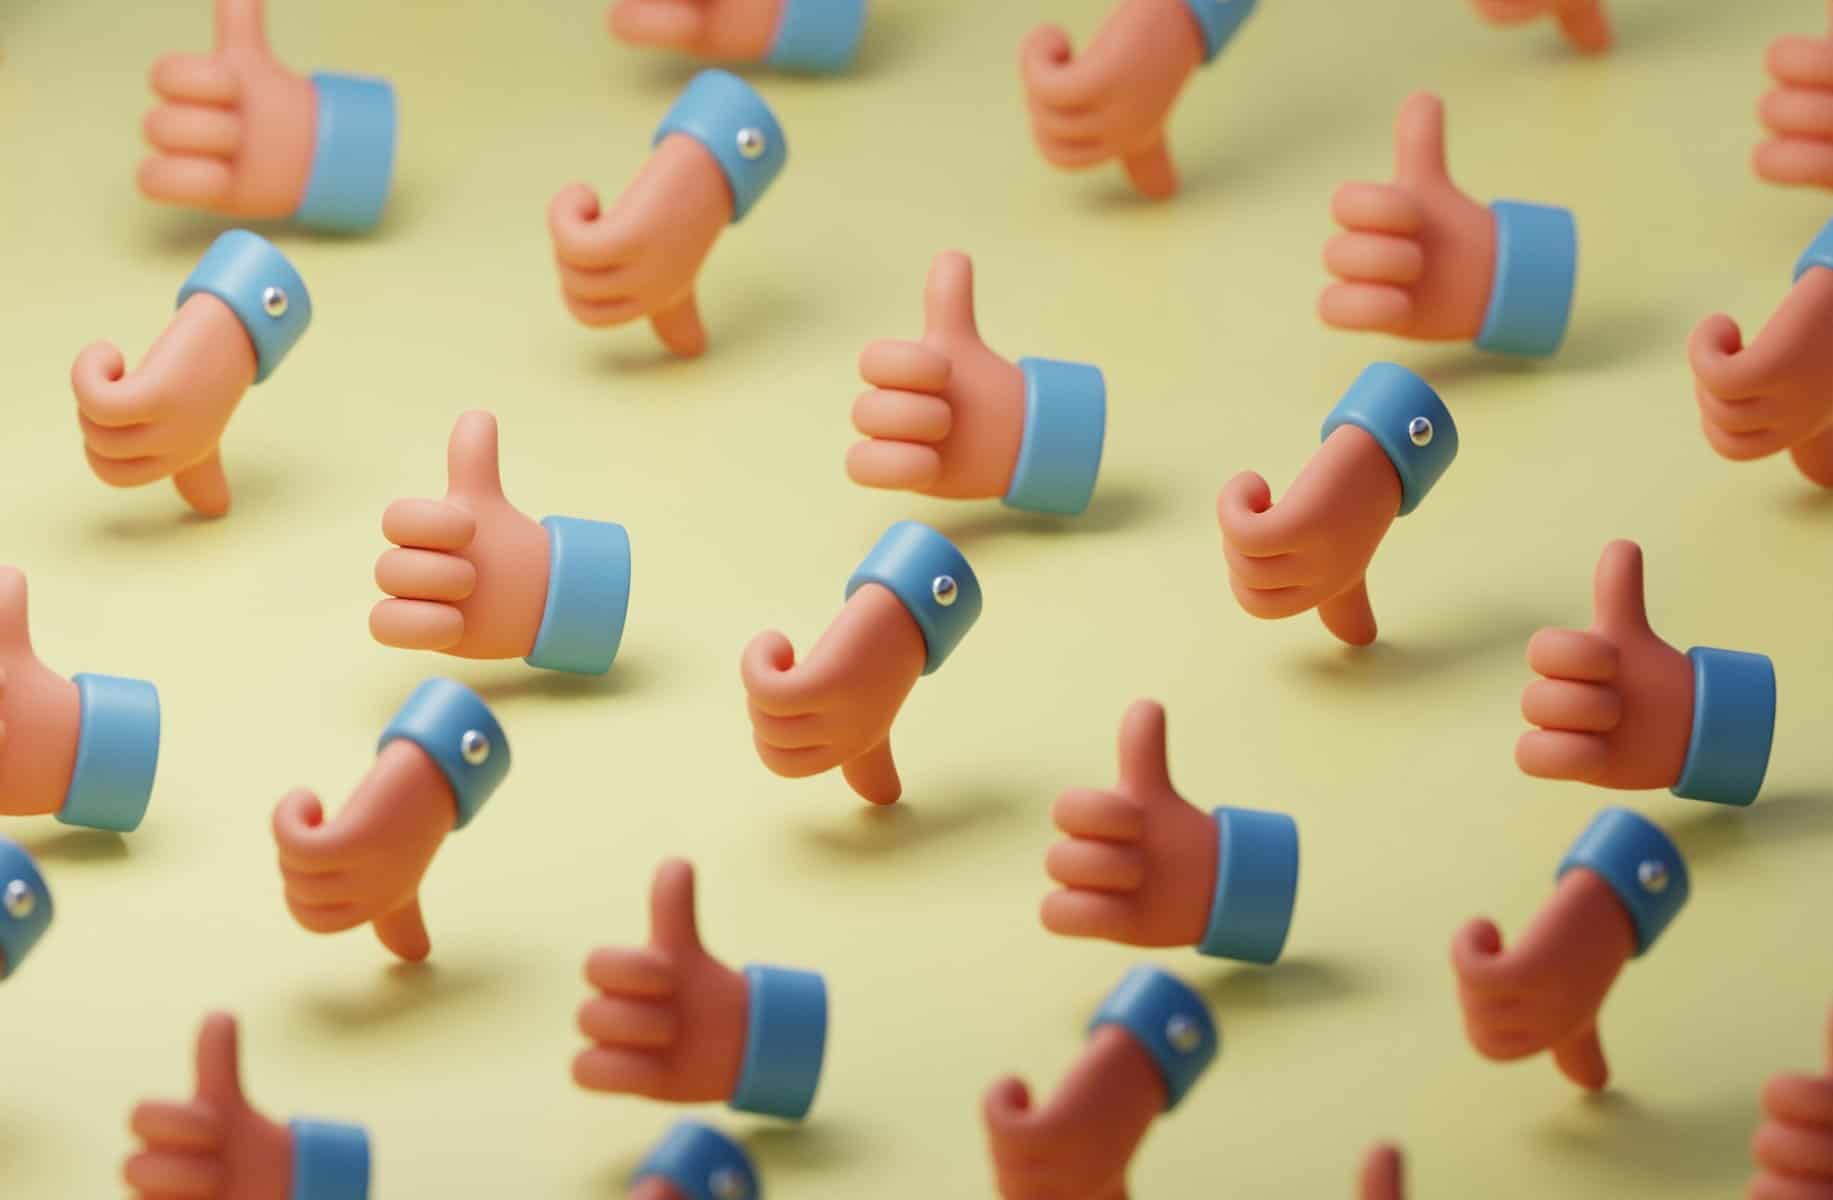 clay hands with thumbs up and thumbs down